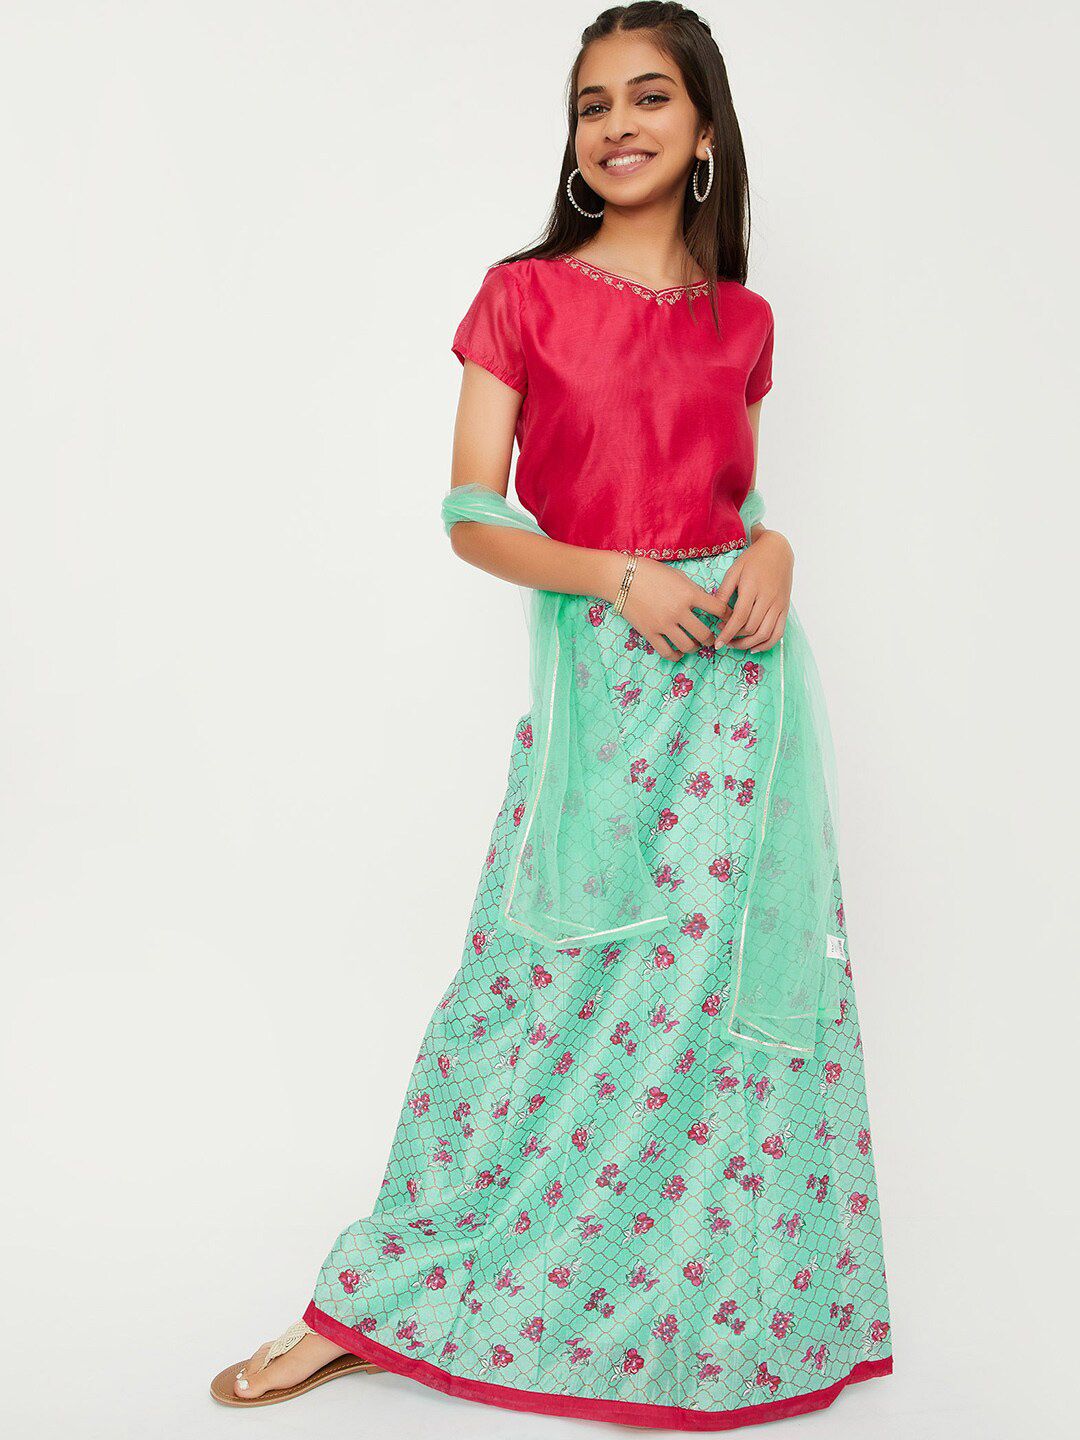 max Girls Ready to Wear Lehenga & Blouse With Dupatta Price in India